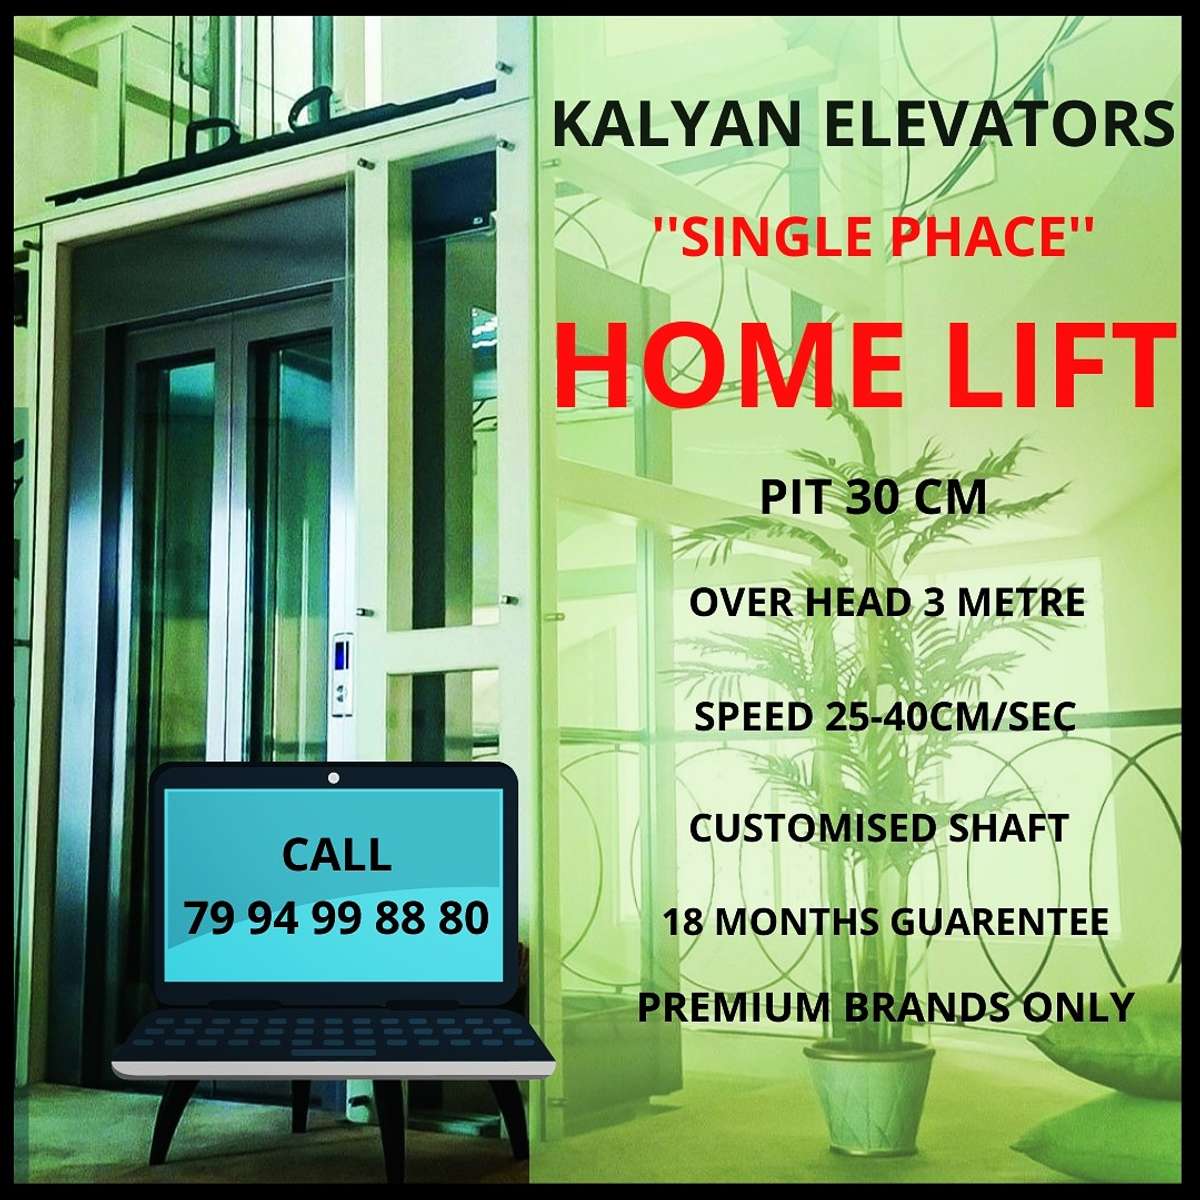 Kalyan Home Elevators offers the long-awaited solution to vertical mobility within homes at affordable prices and easy-to-use features. Our customized and aesthetically designed home lifts are easily installable in preexisting homes as well as houses under construction, and help you relieve the headache of climbing. More details:- ❤❤❤